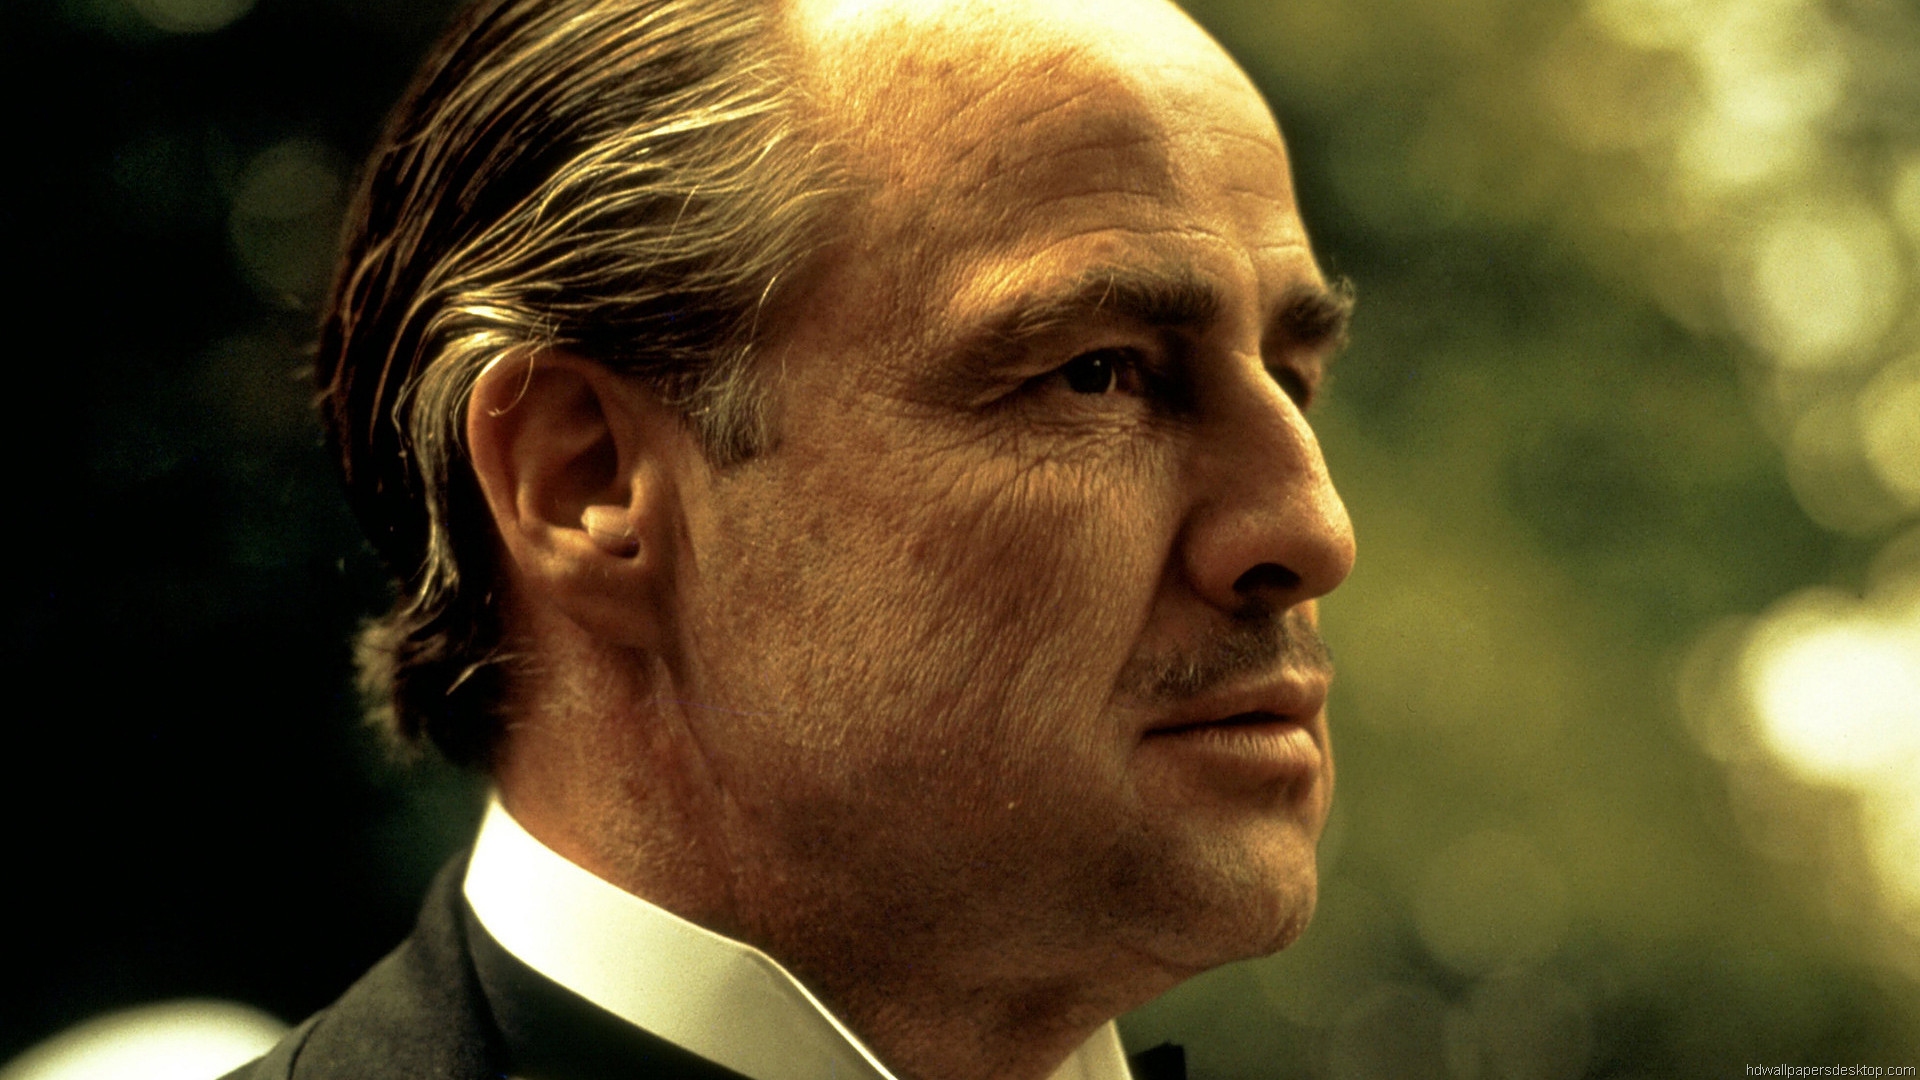 The Godfather Wallpaper HD Widescreen Movie